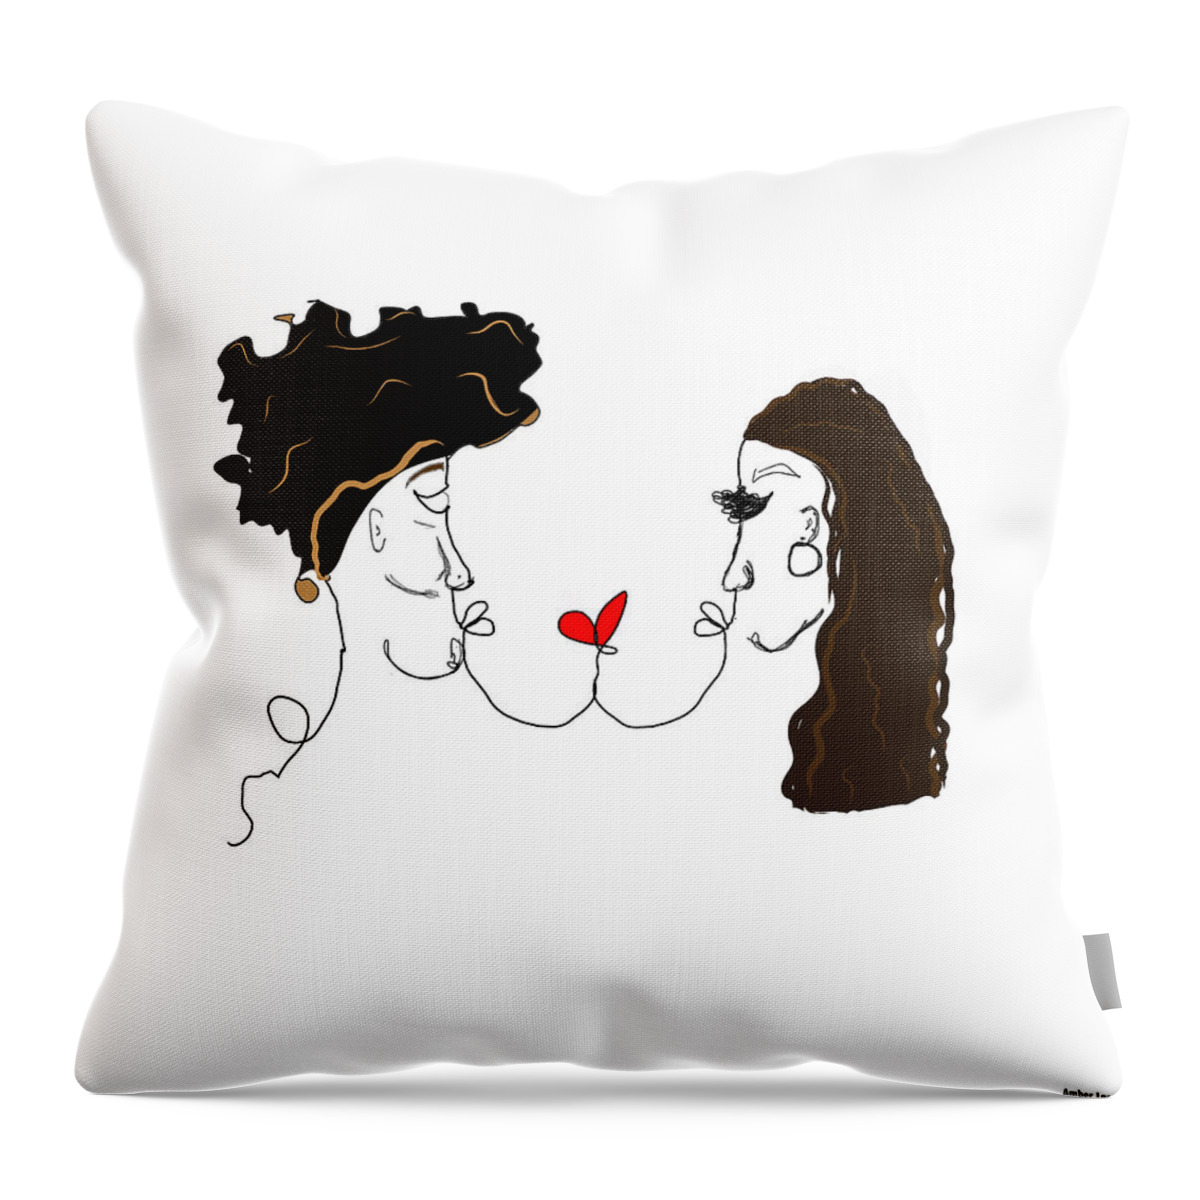  Throw Pillow featuring the digital art Gemini Love by Amber Lasche